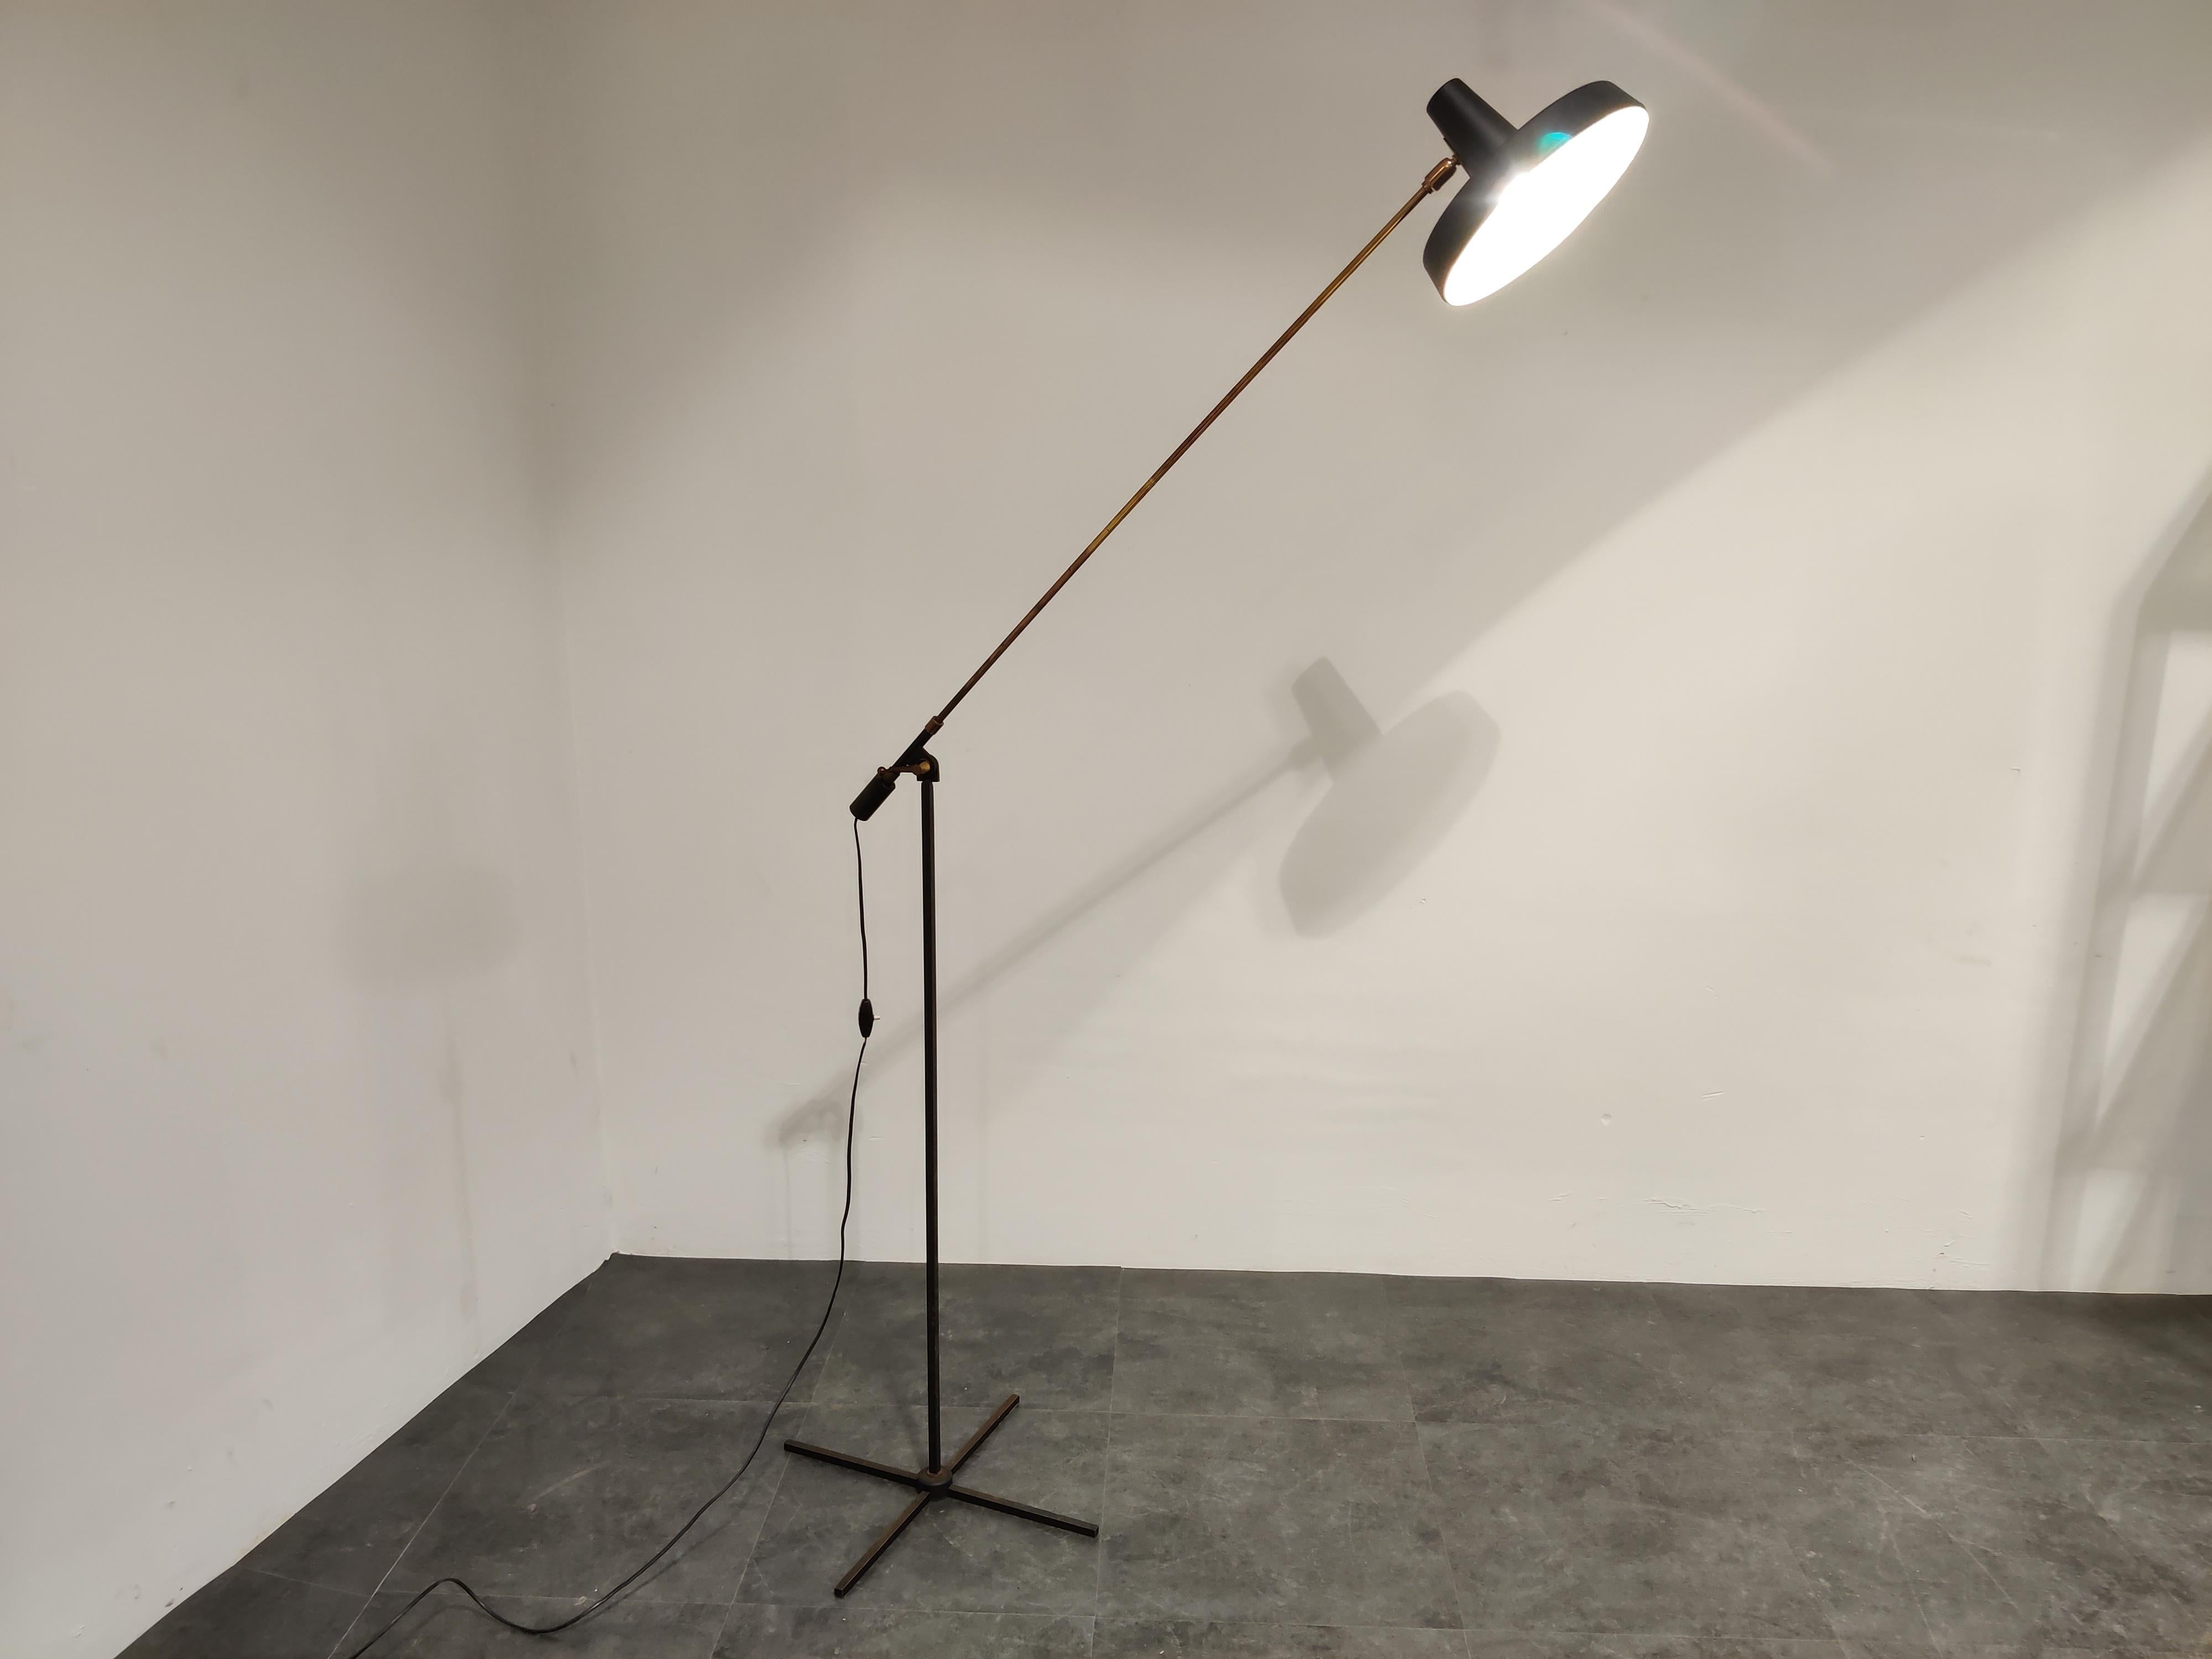 Elegant midcentury articulated floor lamp made of brass and a X shaped base.

The shade has an enameled layer on the inside to create a soft light. The outer side of the lamp shade is made of aluminum mounted an a brass arm.

Both shade and arm